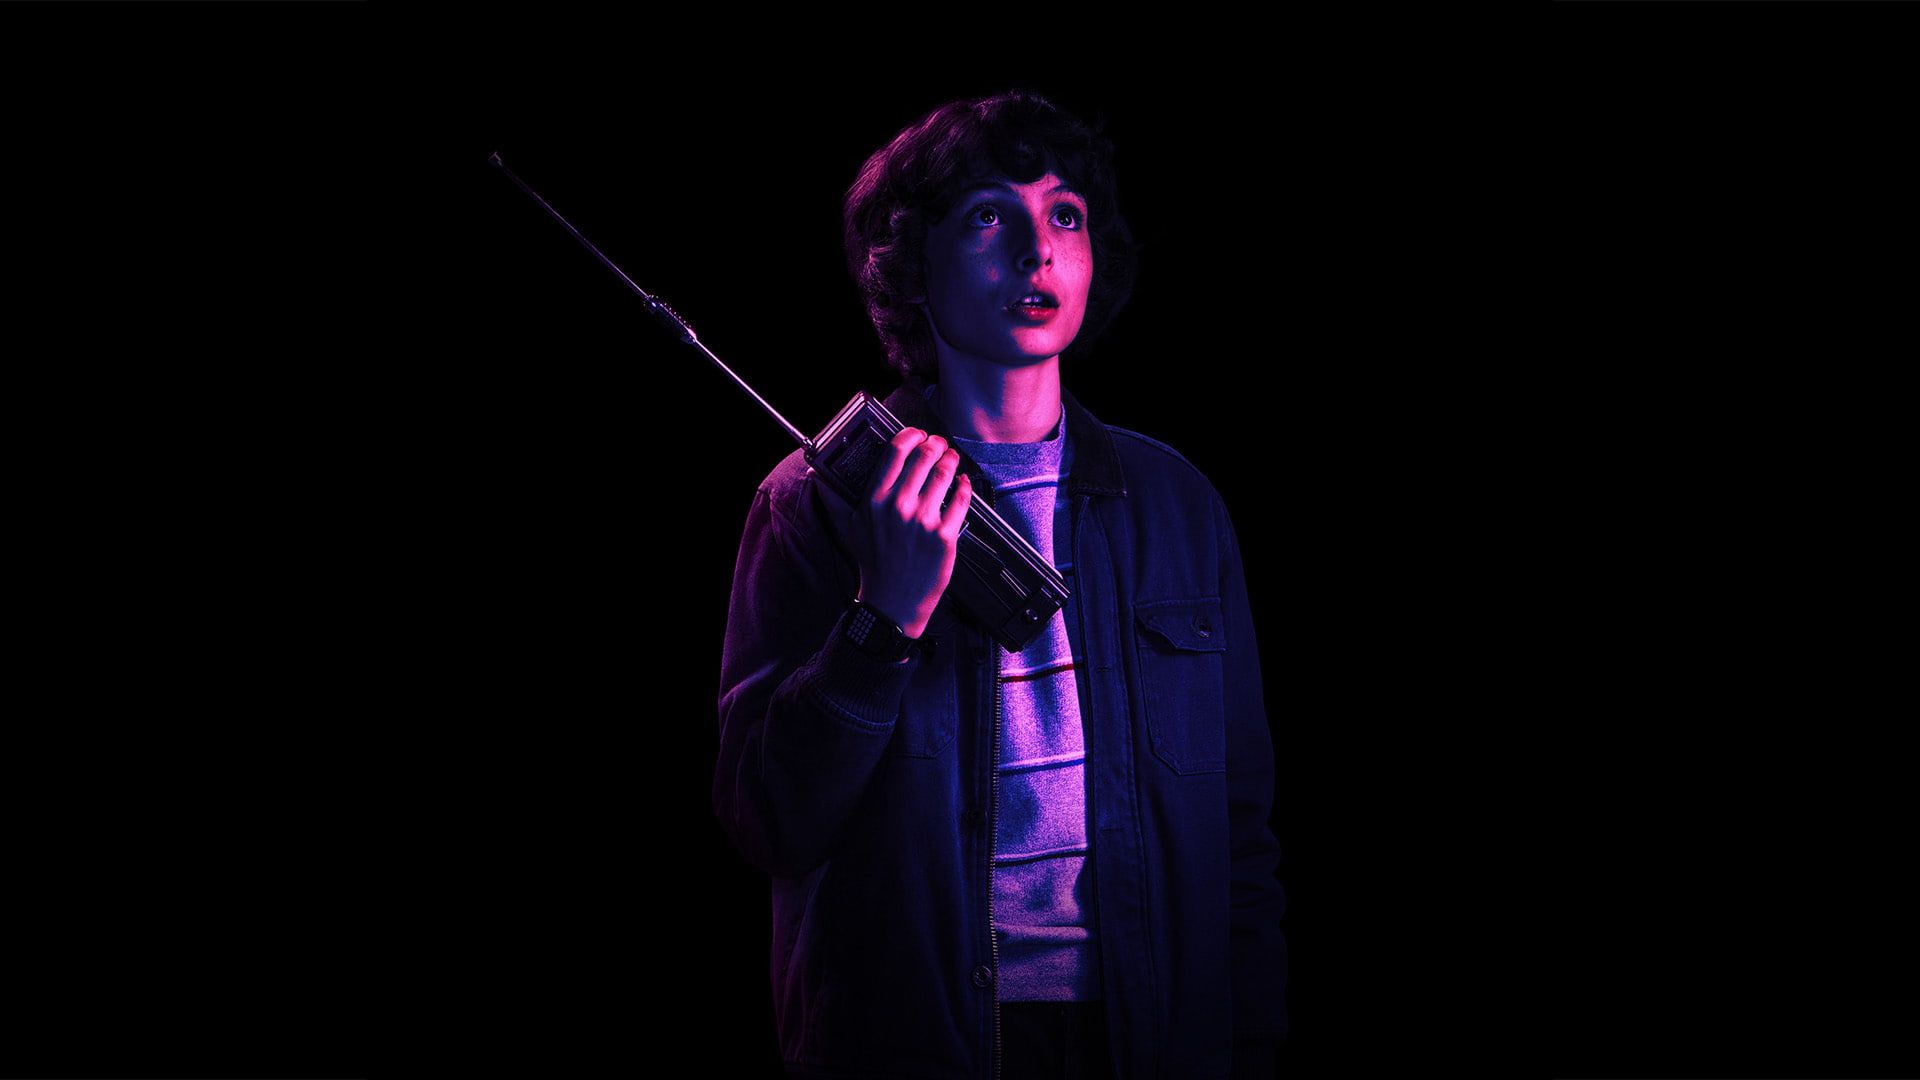 Pictures Of Lucas From Stranger Things Wallpapers